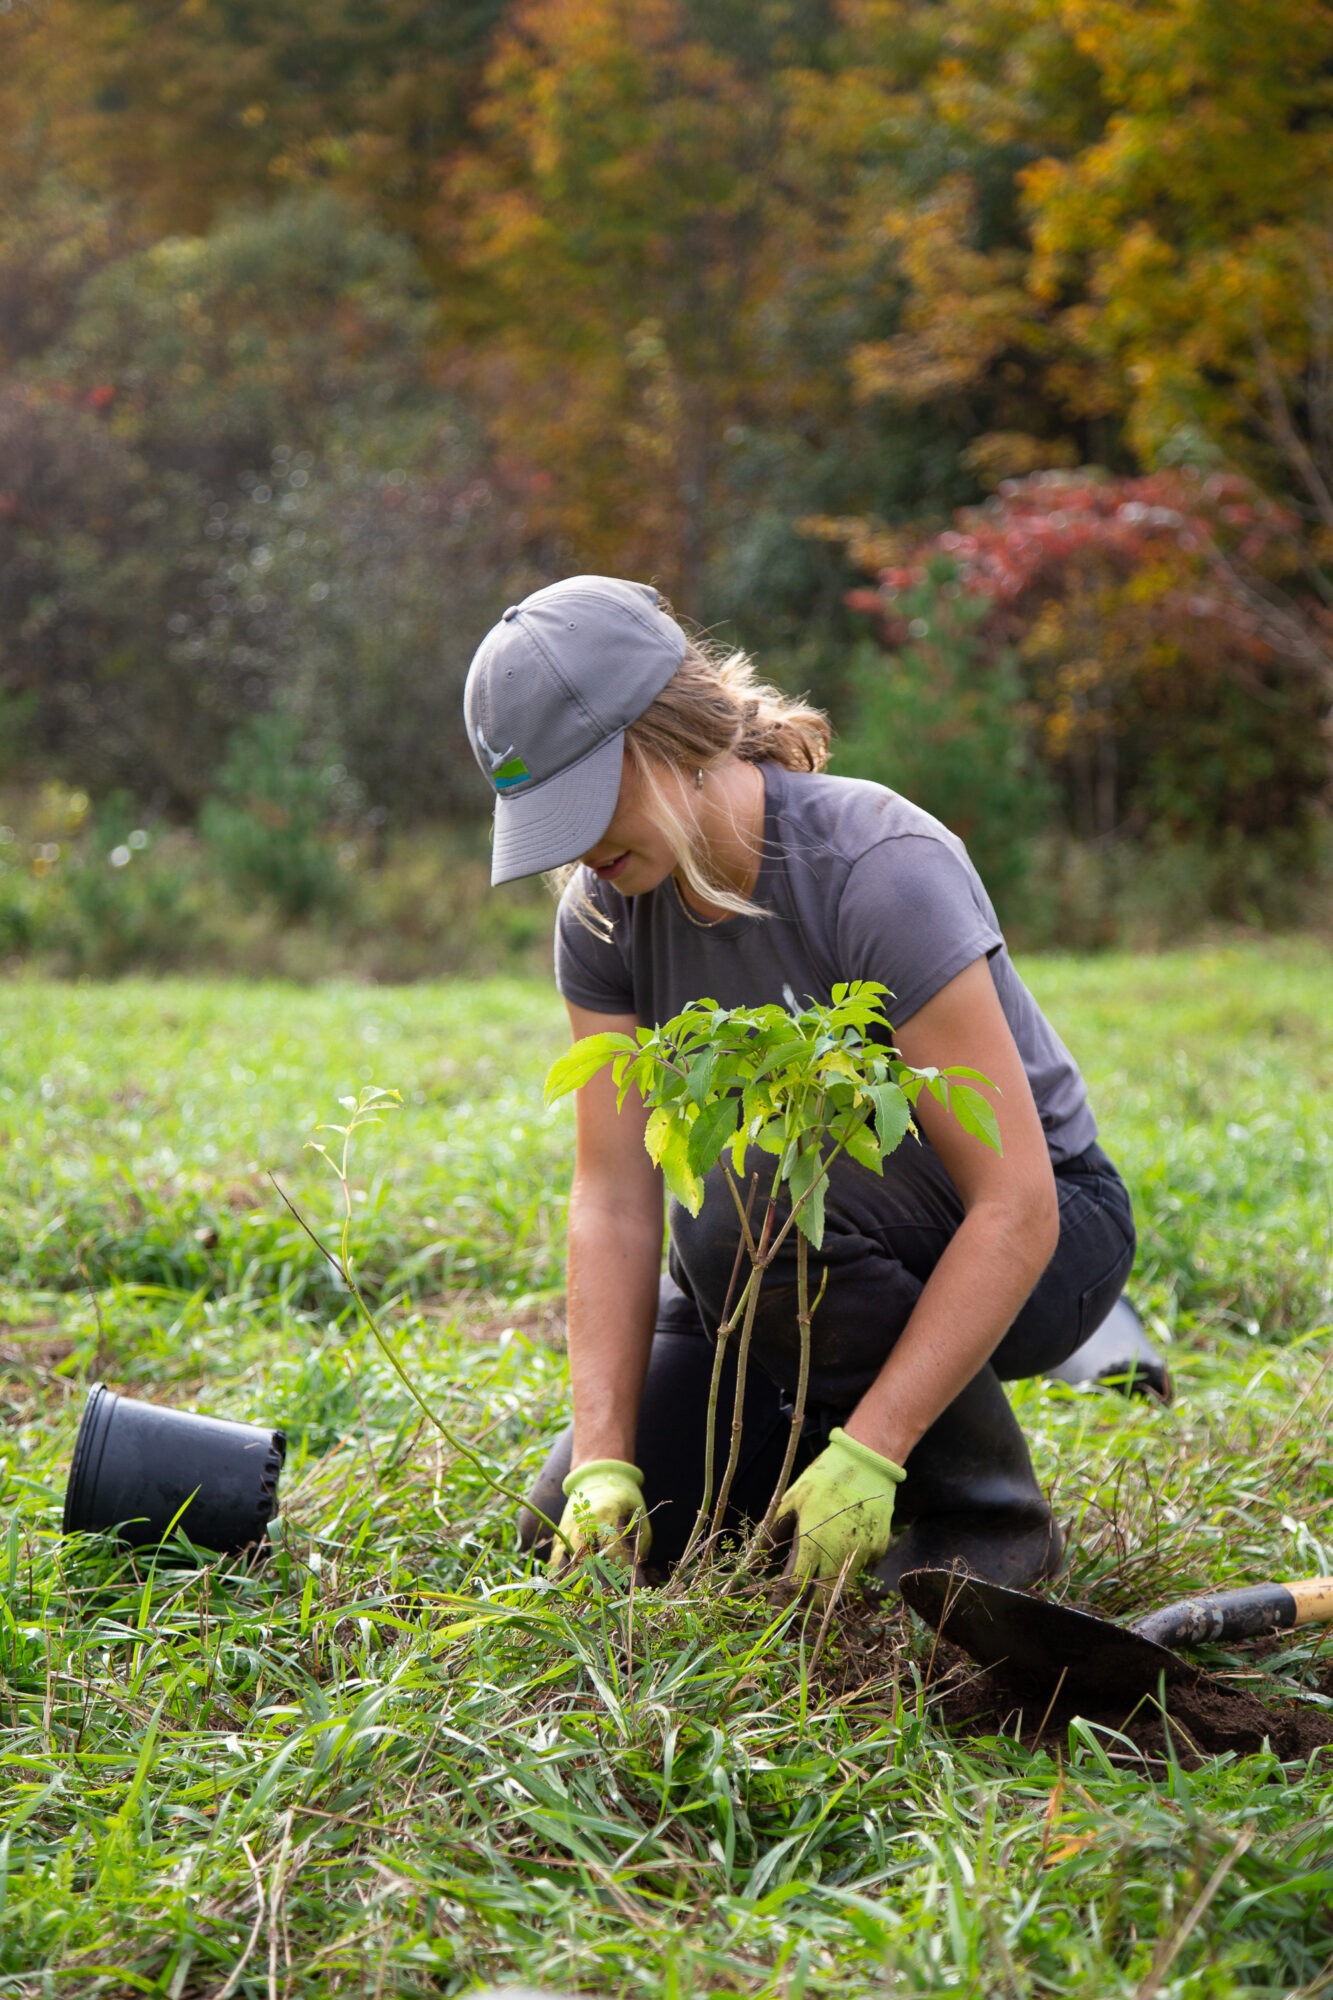 a young woman in a conservation halton ballcap kneels down to plant a tree